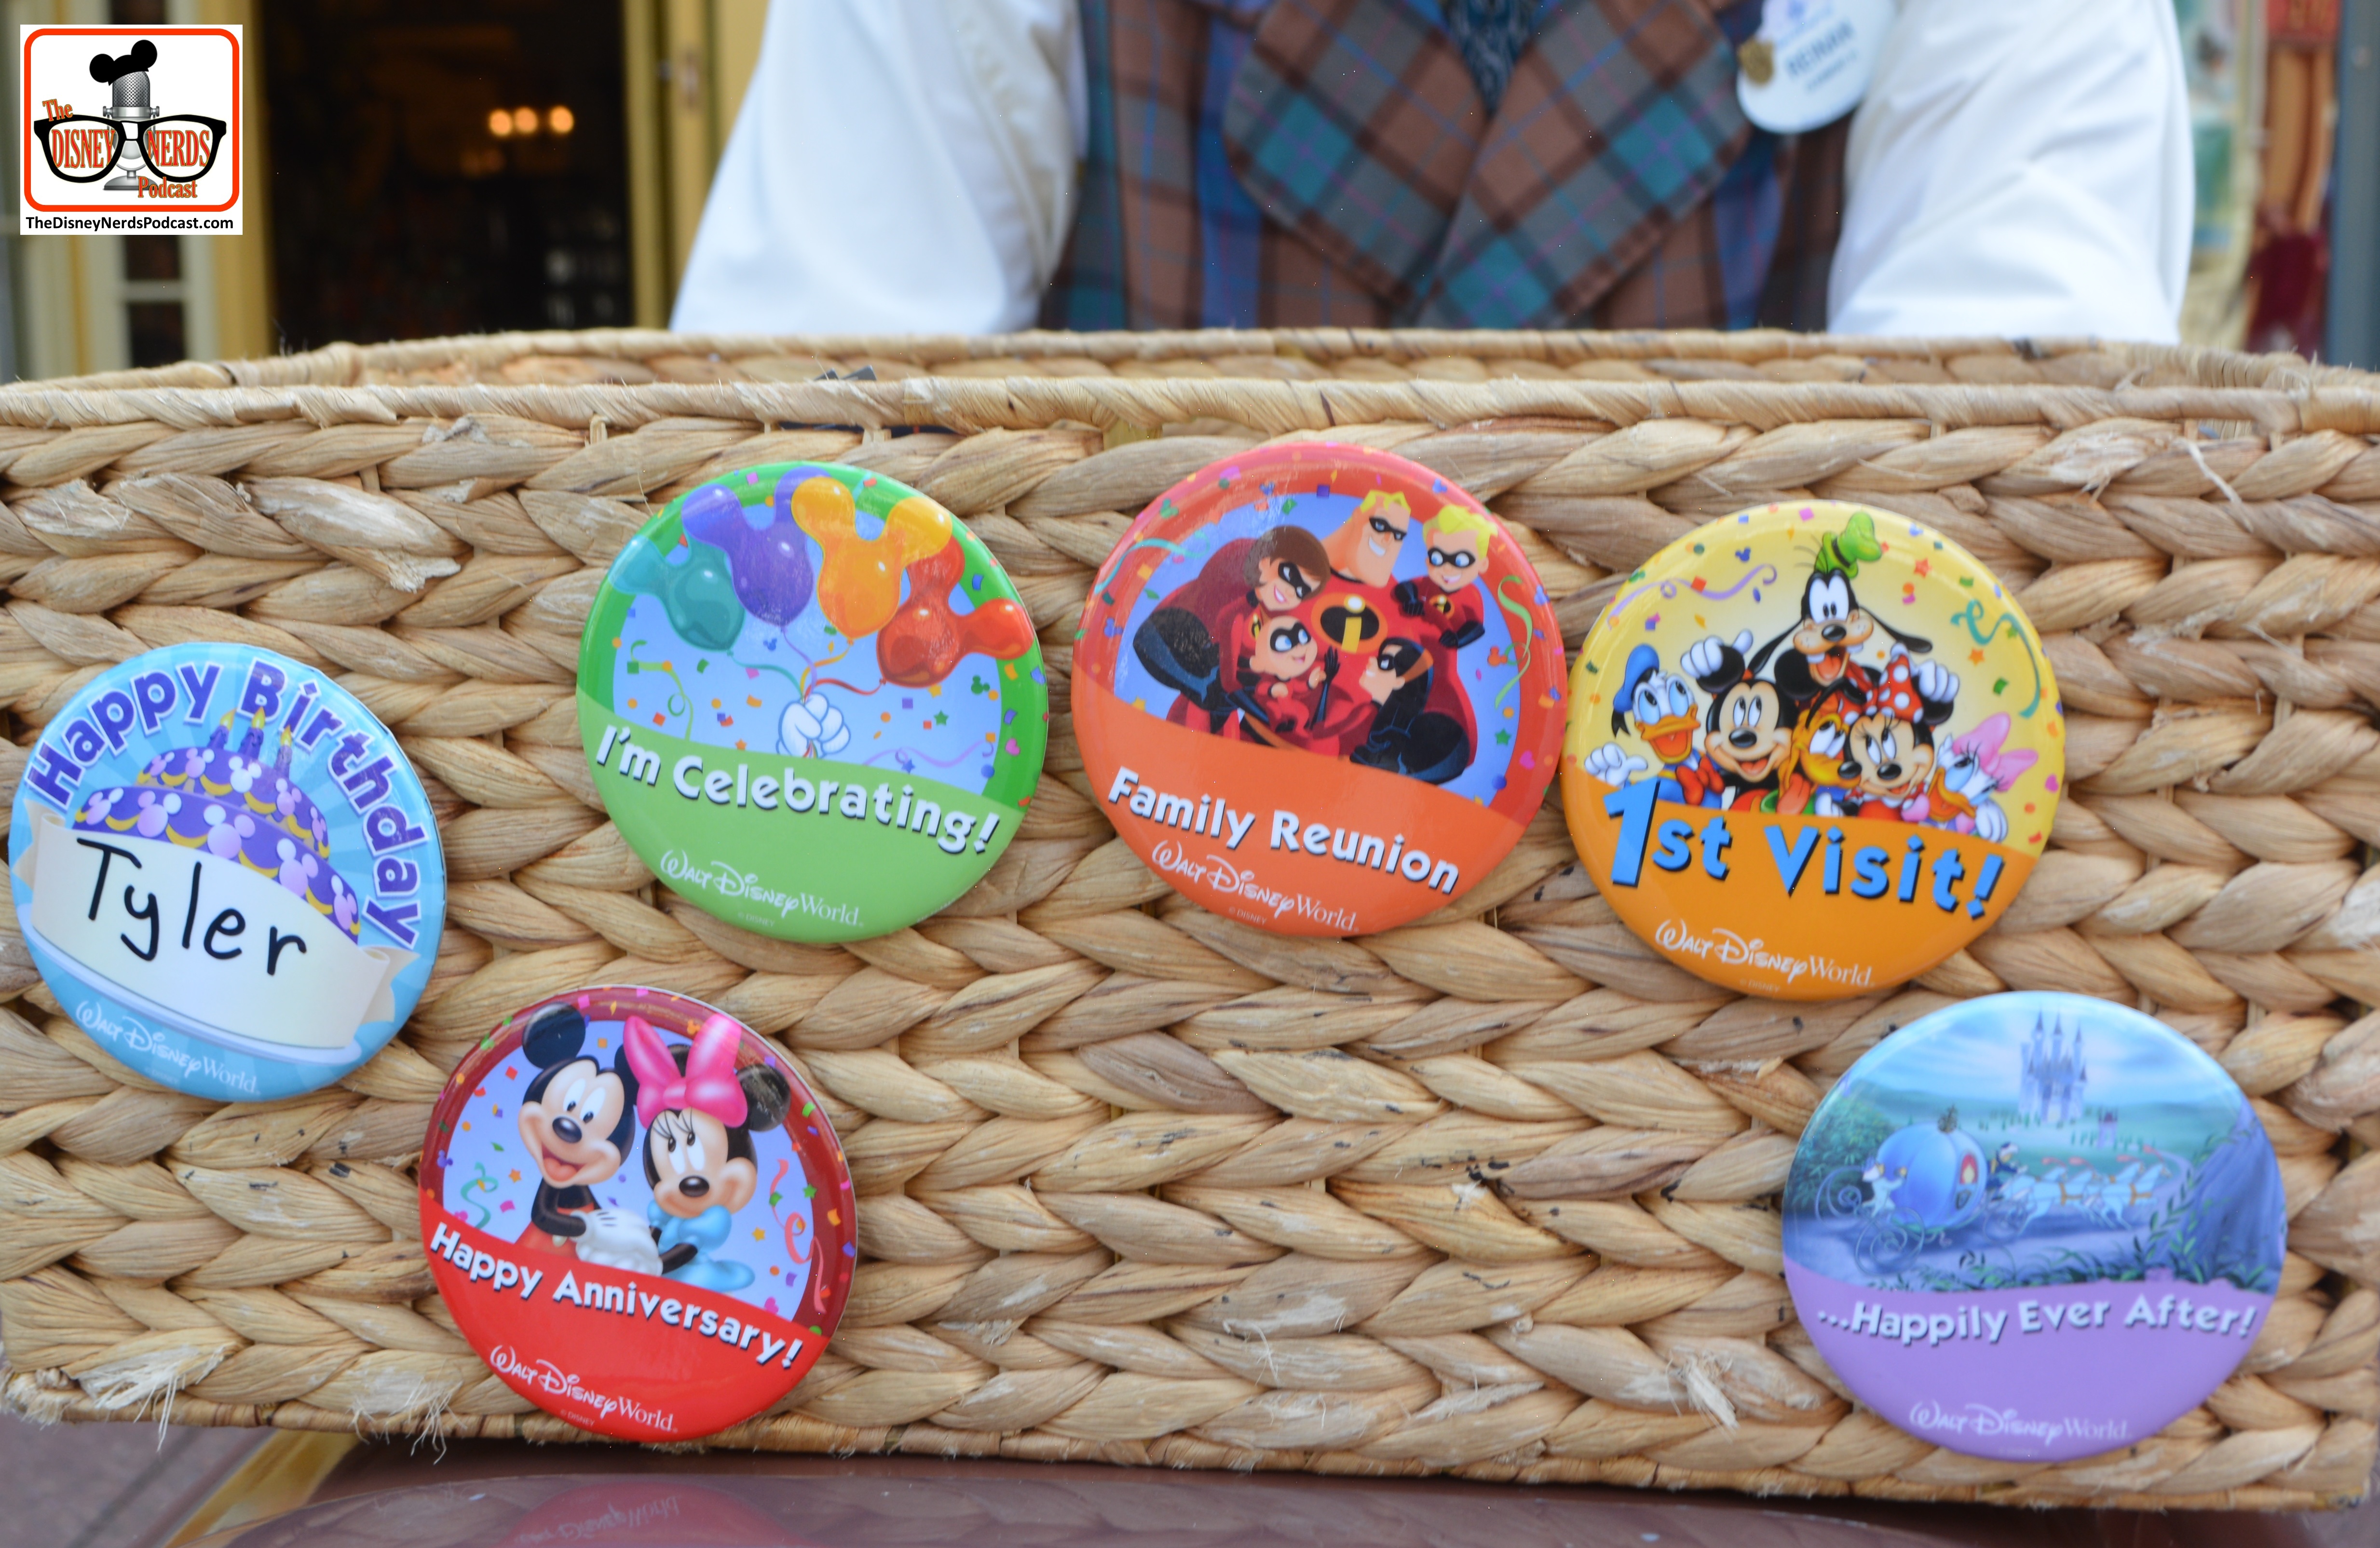 Cast Members with celebration buttons on main street.